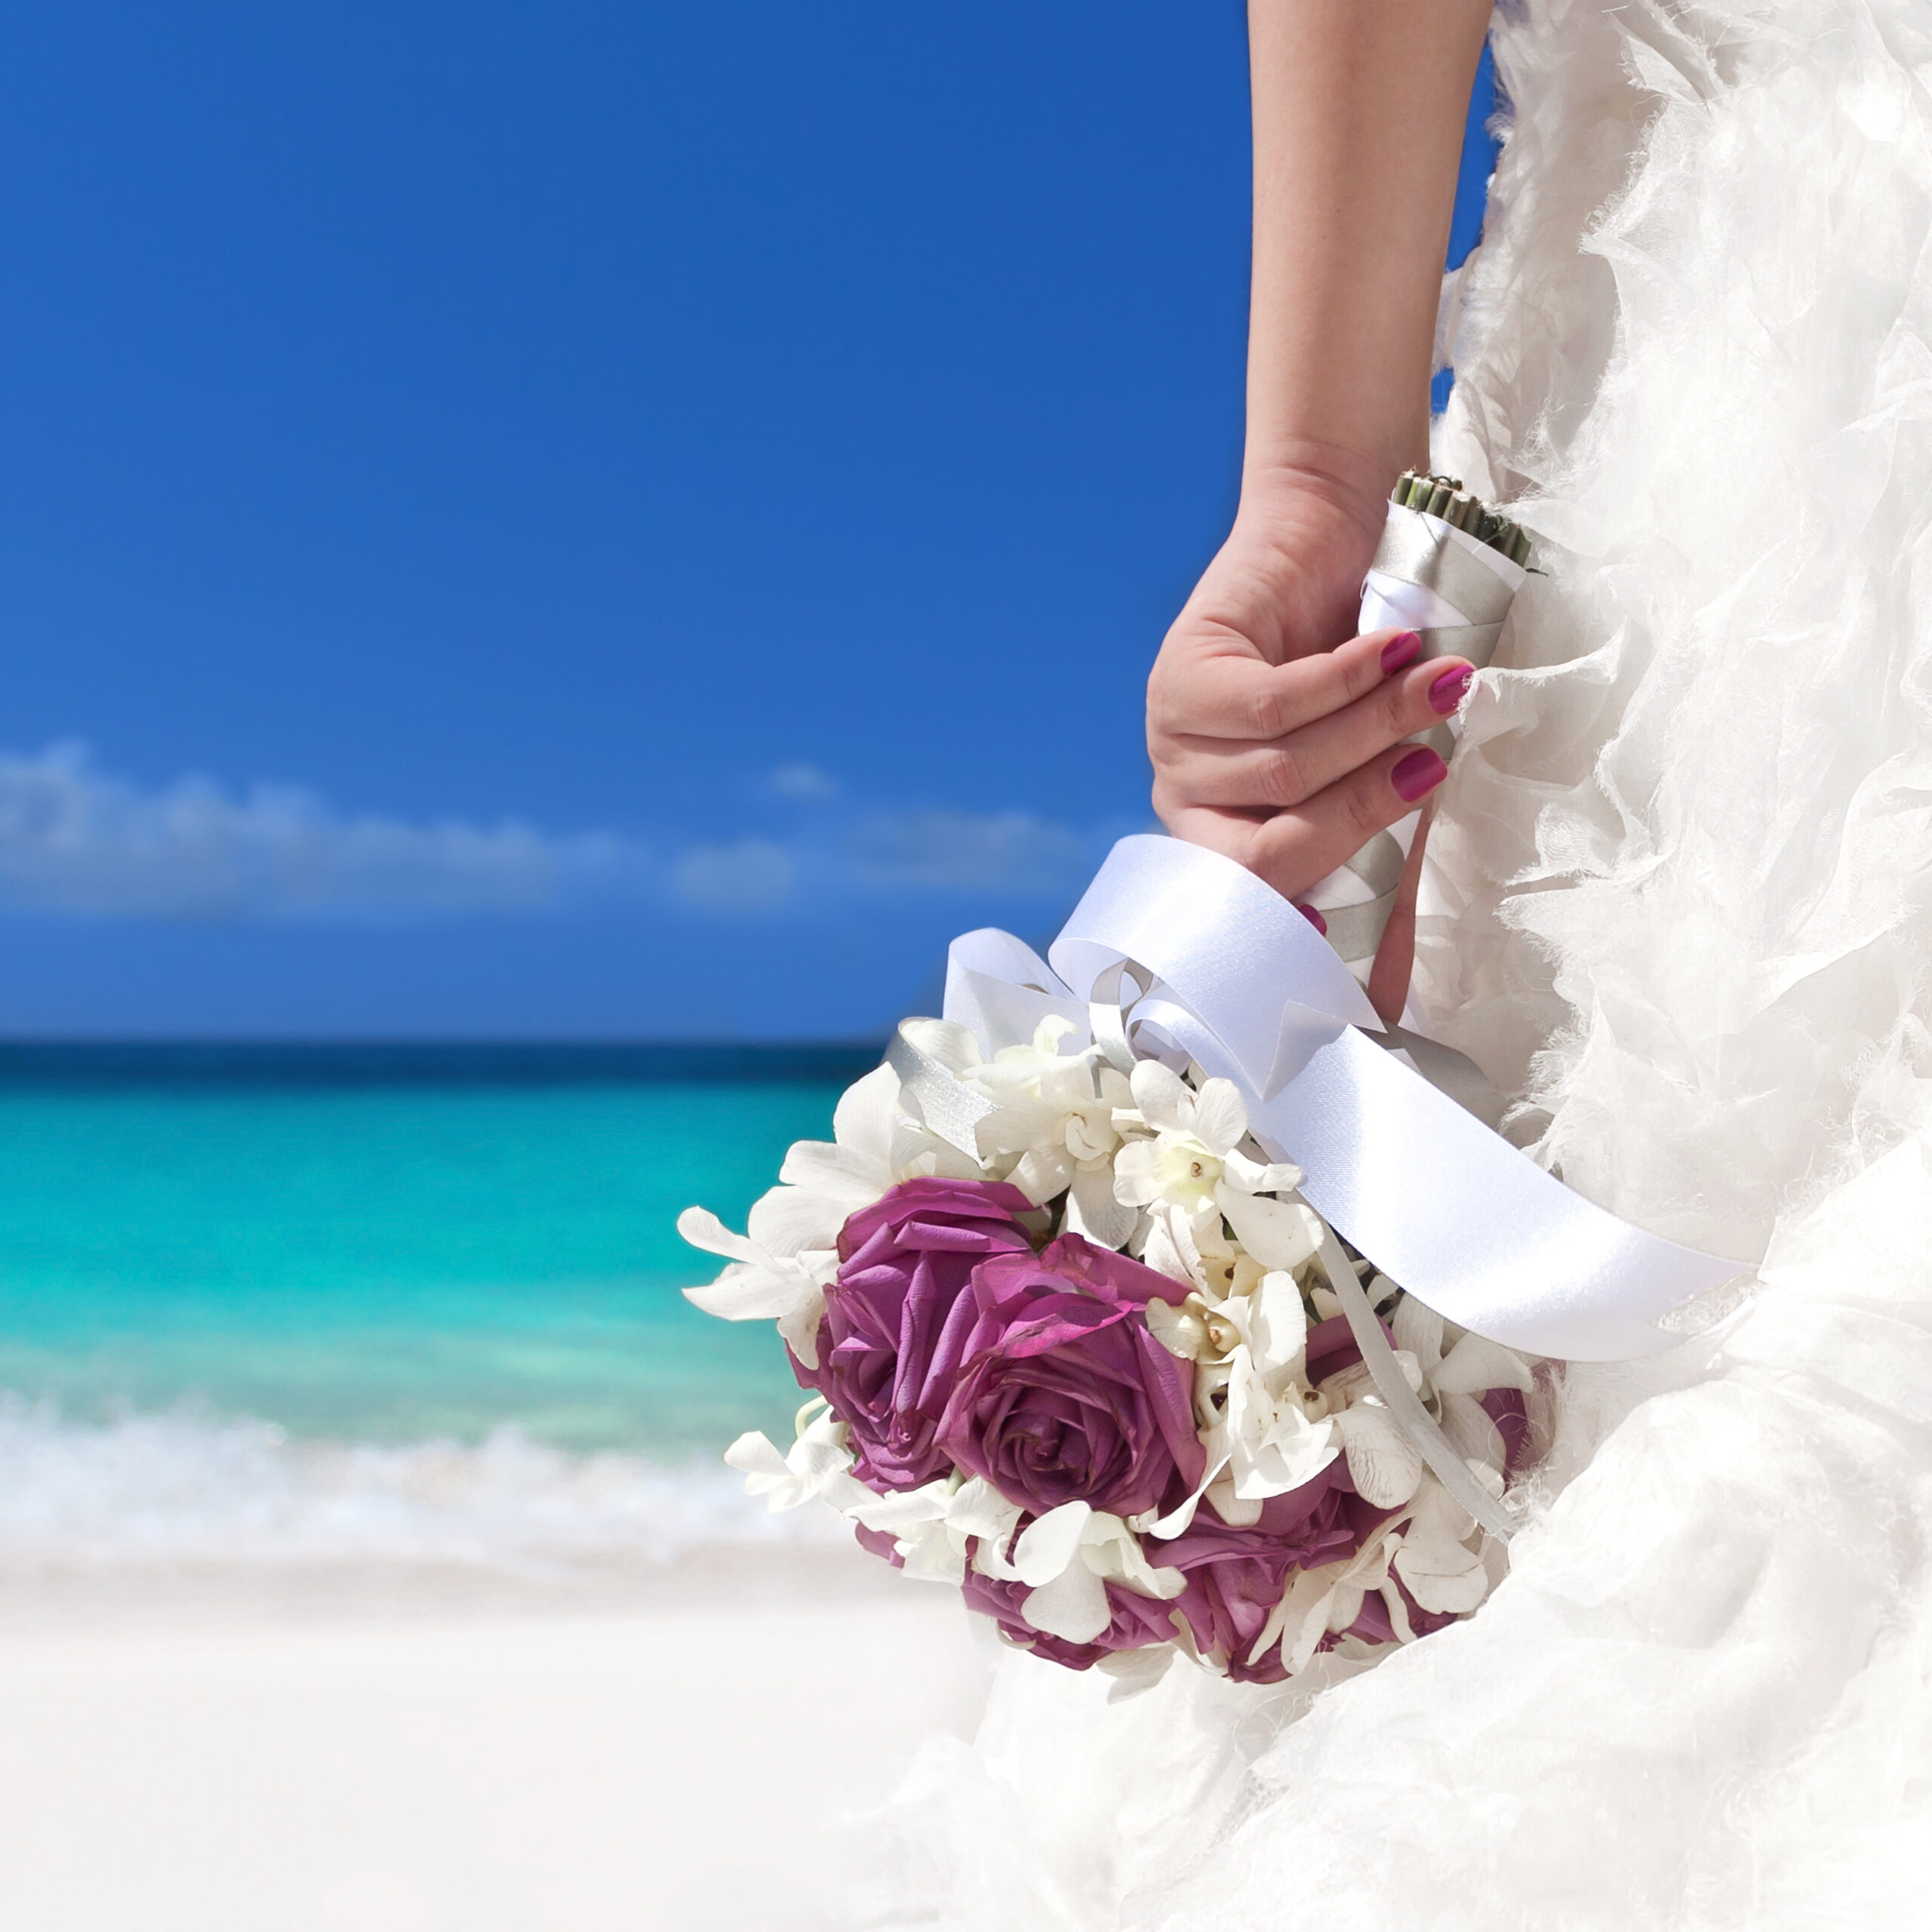 <h1 class="tribe-events-single-event-title">Win a honeymoon getaway at our 2023 Wedding Showcase!</h1>